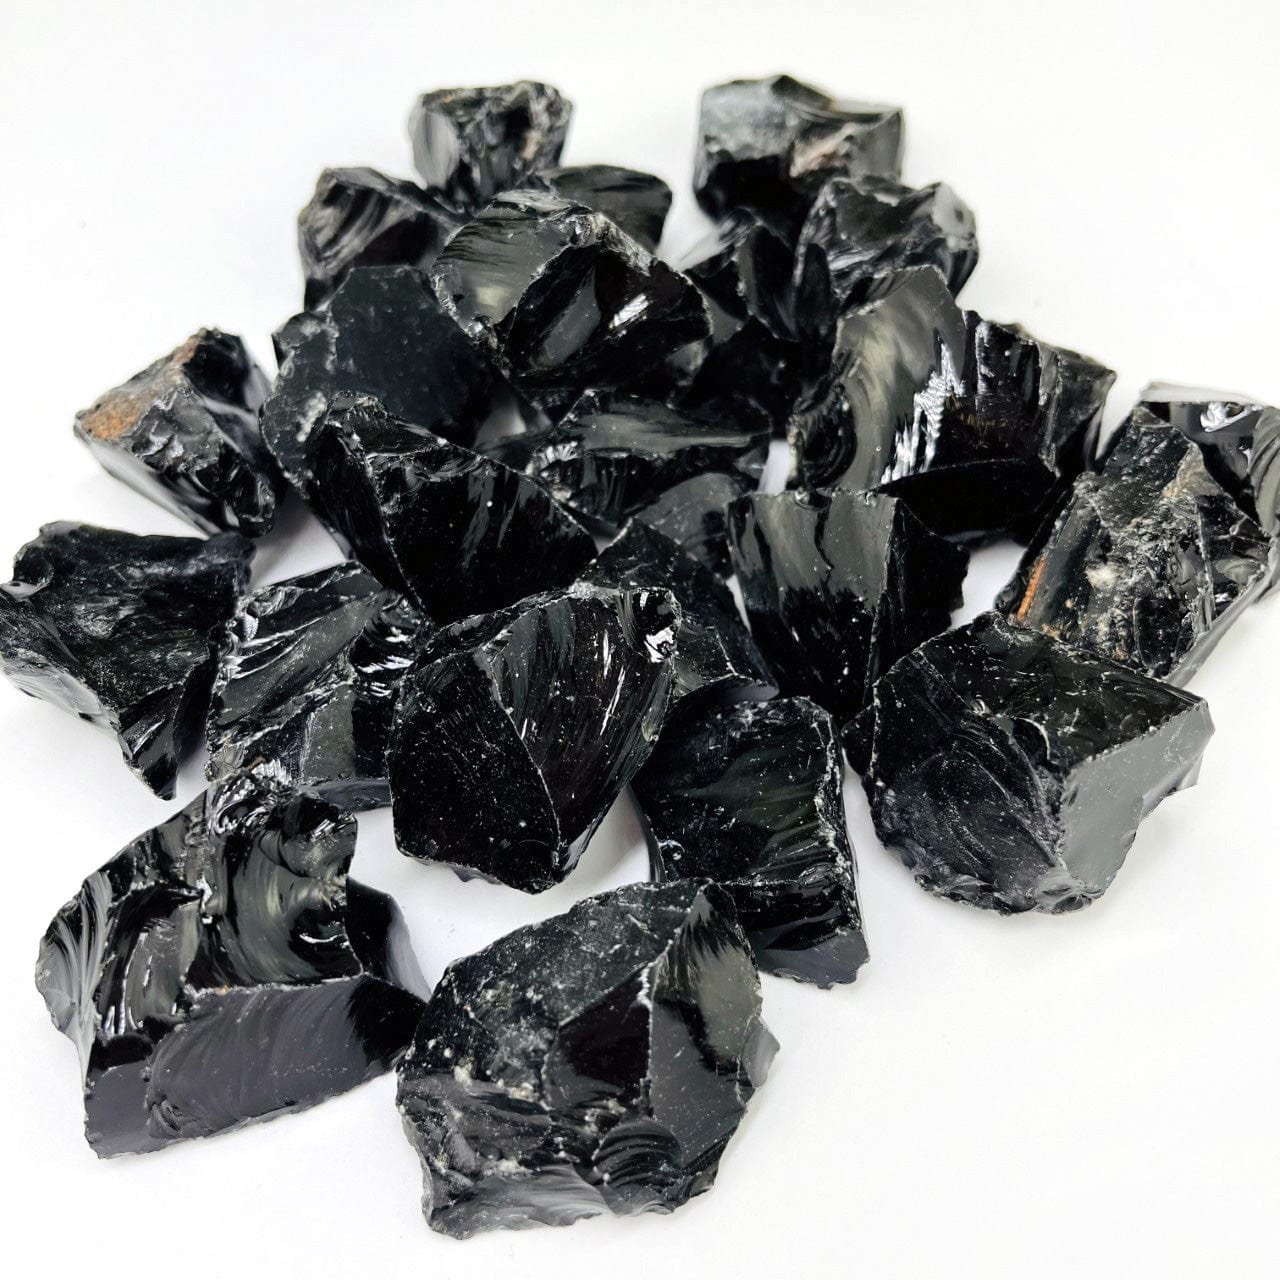 Black Obsidian Natural Stones in a pile from the side view